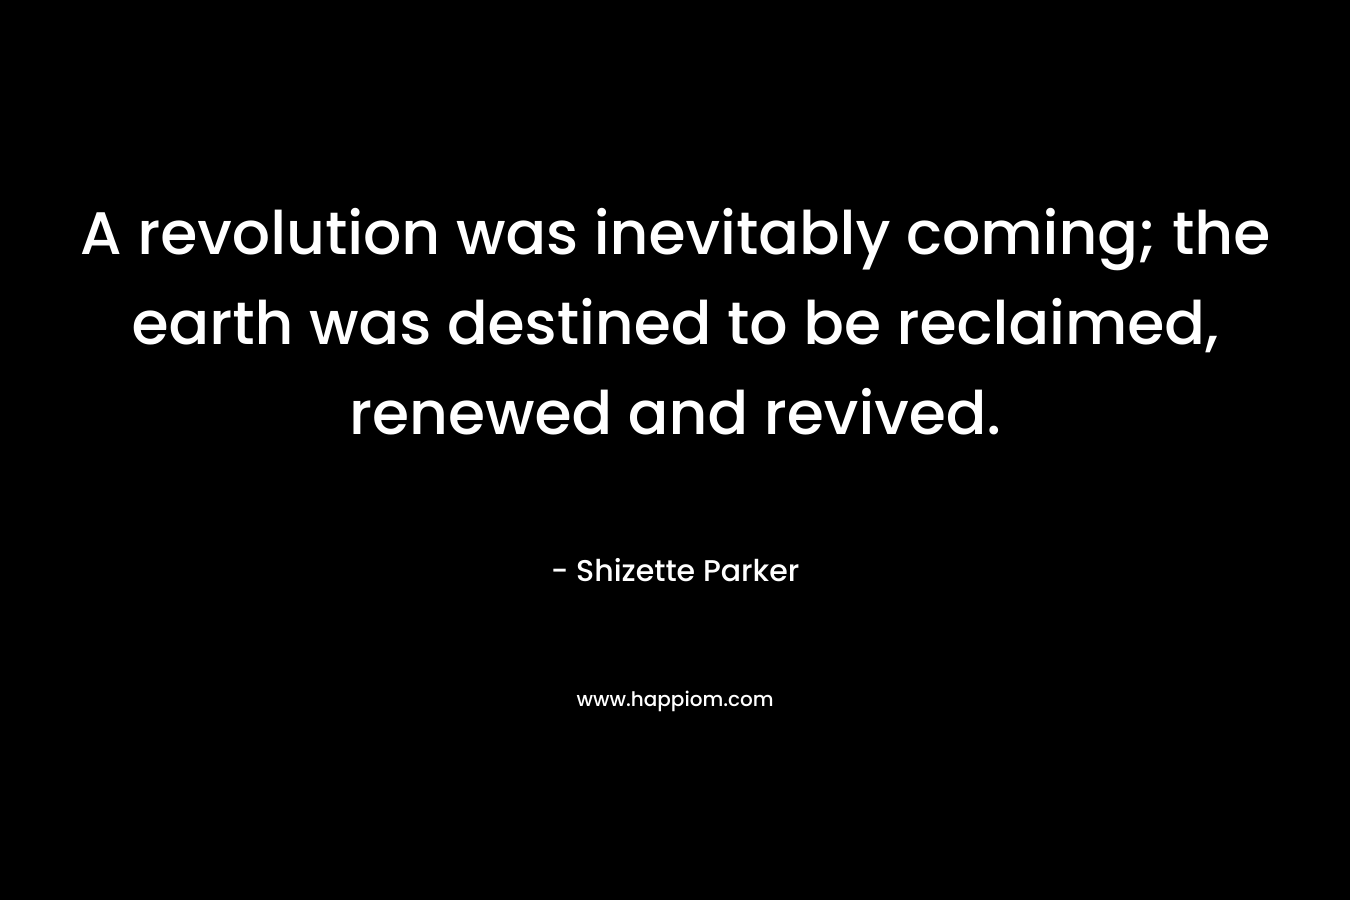 A revolution was inevitably coming; the earth was destined to be reclaimed, renewed and revived. – Shizette Parker